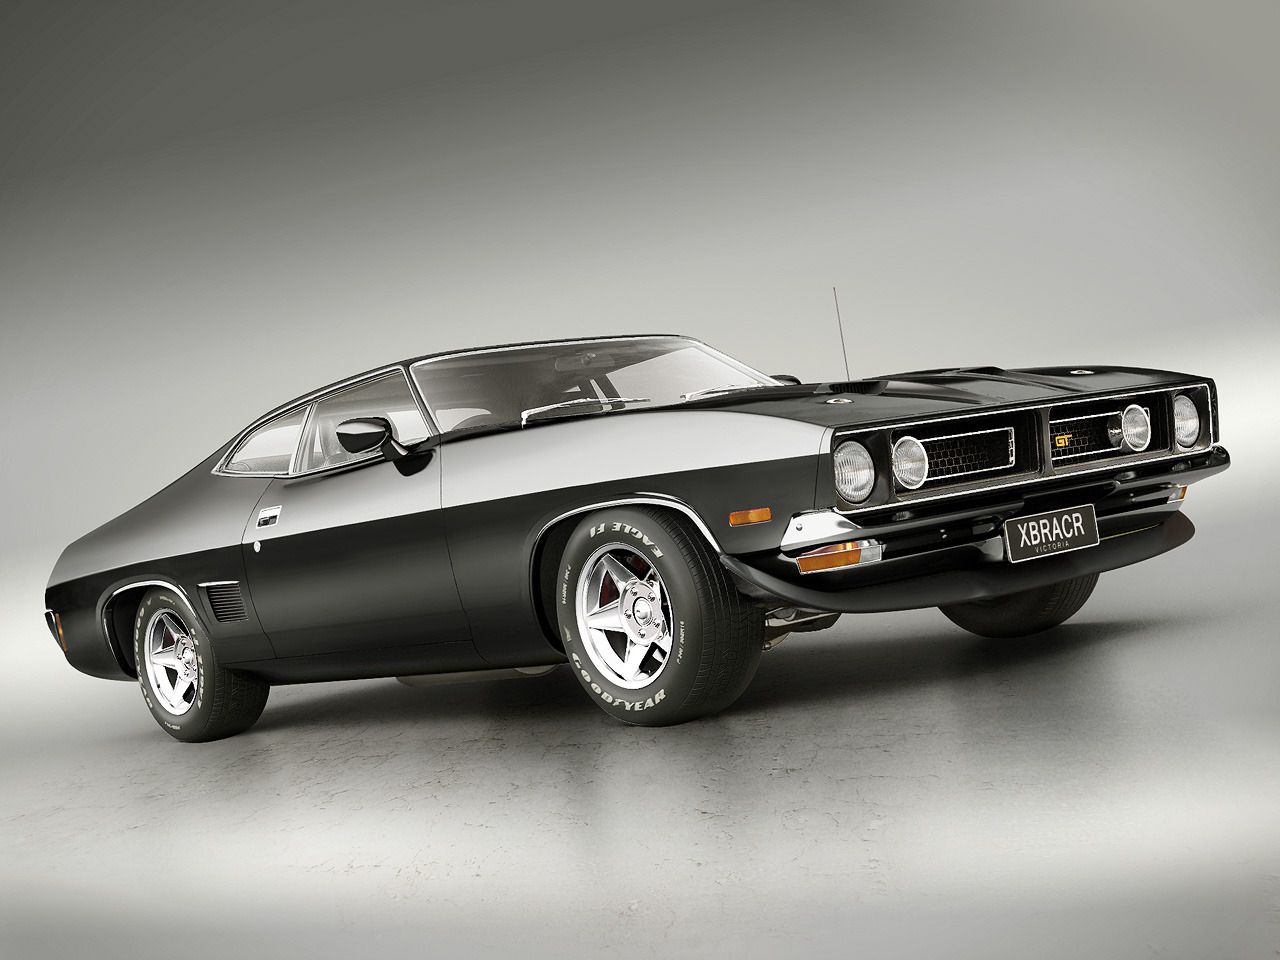 Ford Xb Falcon Wallpapers